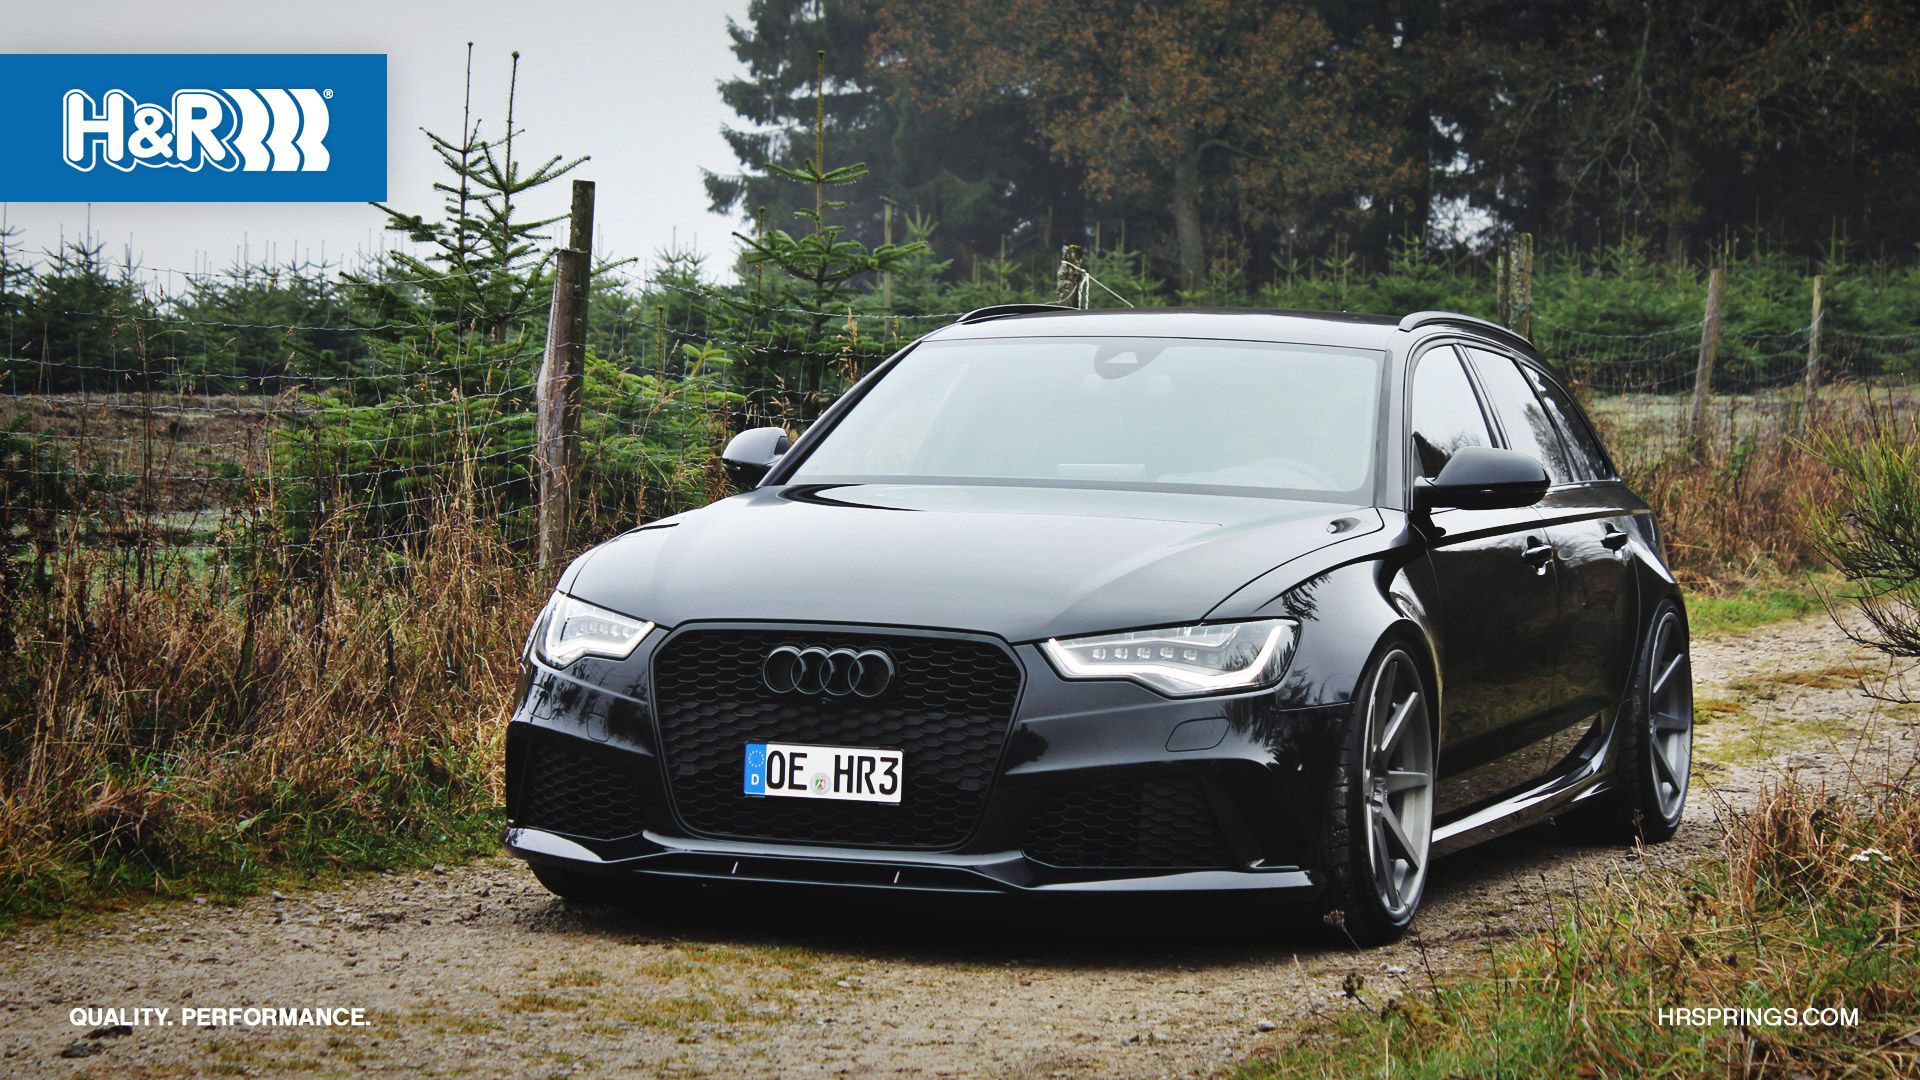 Wallpaper of the Day: H&R Audi RS 6 Avant